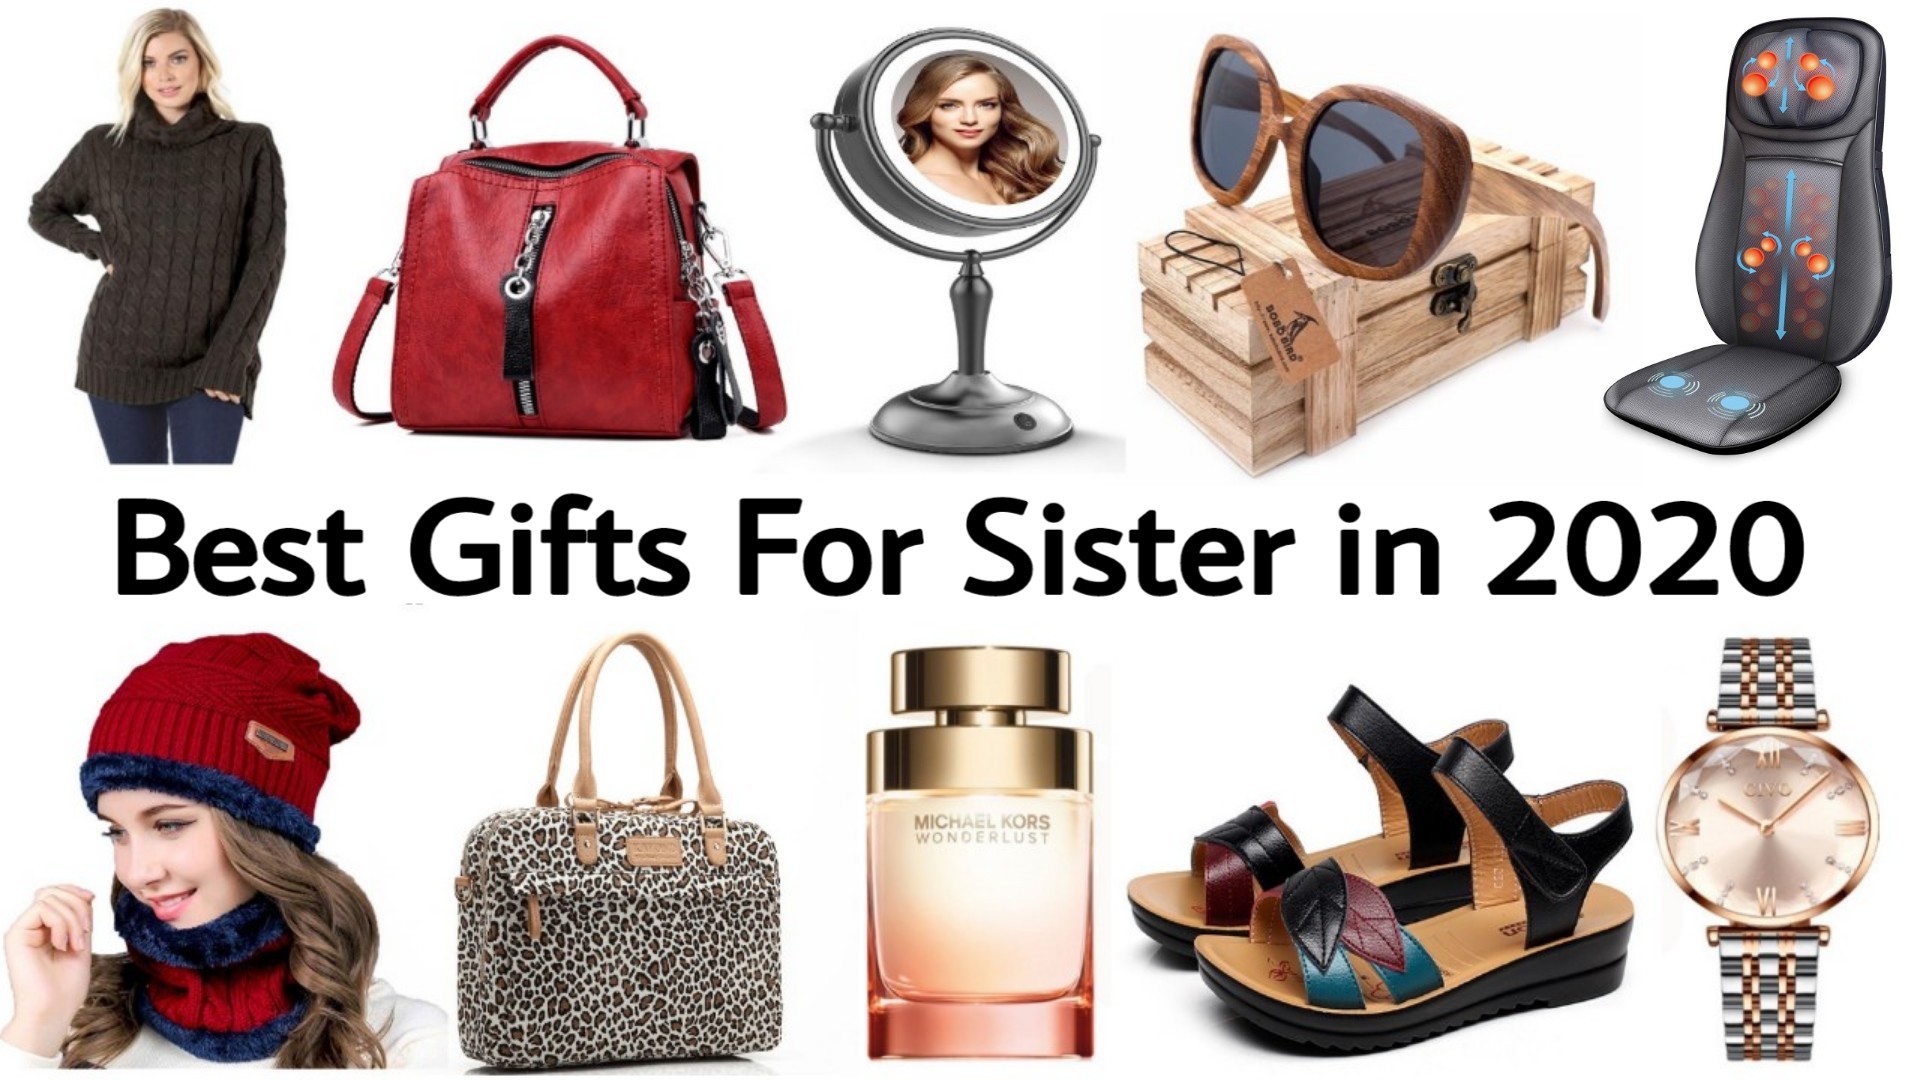 Best Christmas Gifts For Mom 2021: Great Gift Ideas For Every Mom